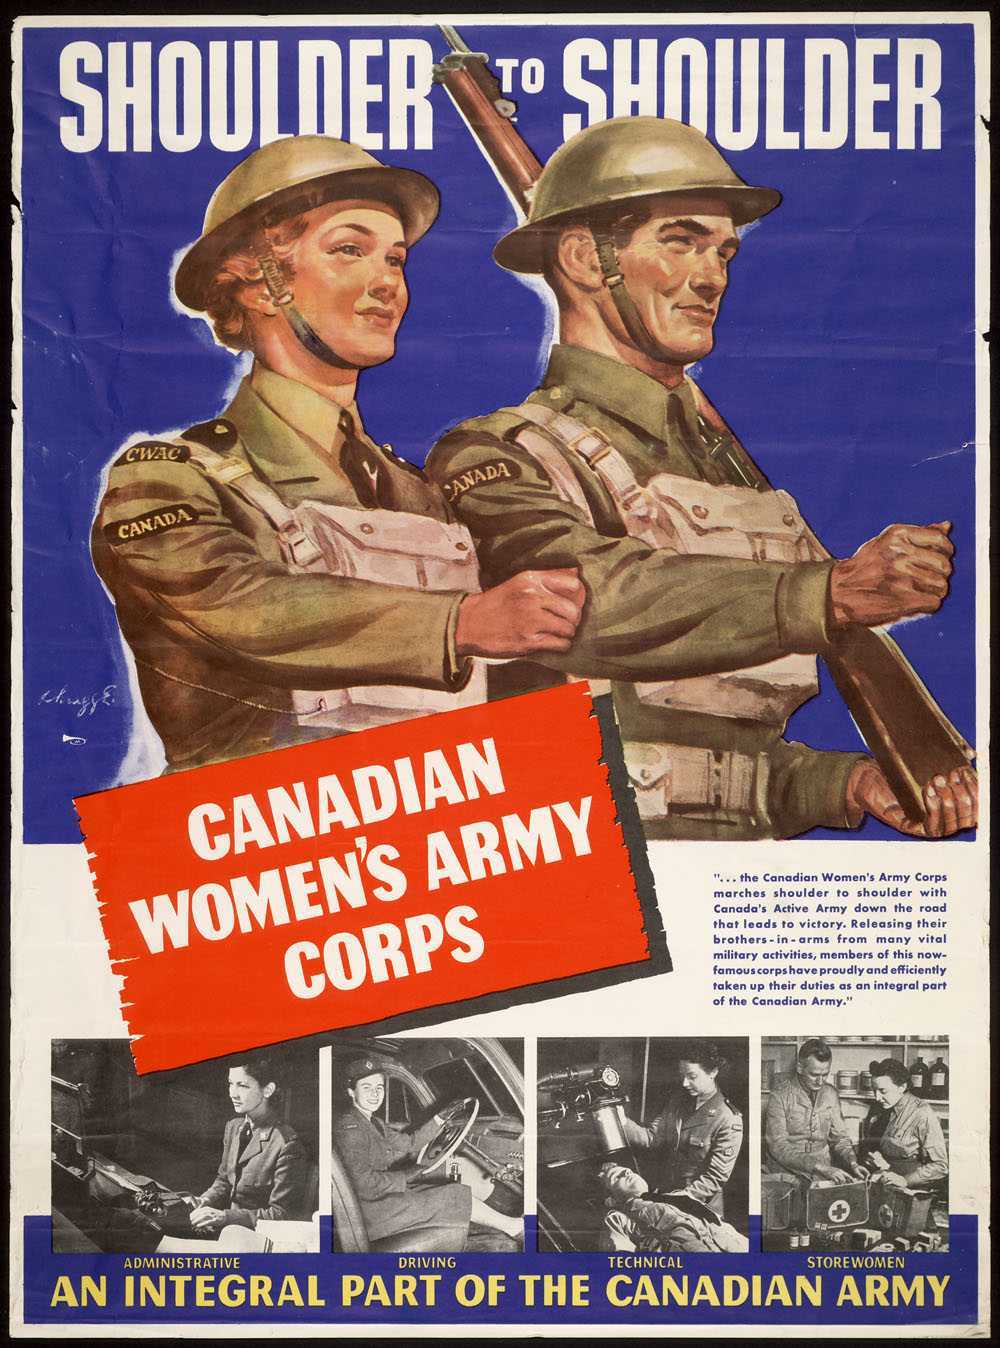 Illustrated poster, colour. A woman and man dressed identically in military dress (though he carries a gun and she does not) march in step with each other. Below, four photos show different roles a woman can play in the army besides combat.